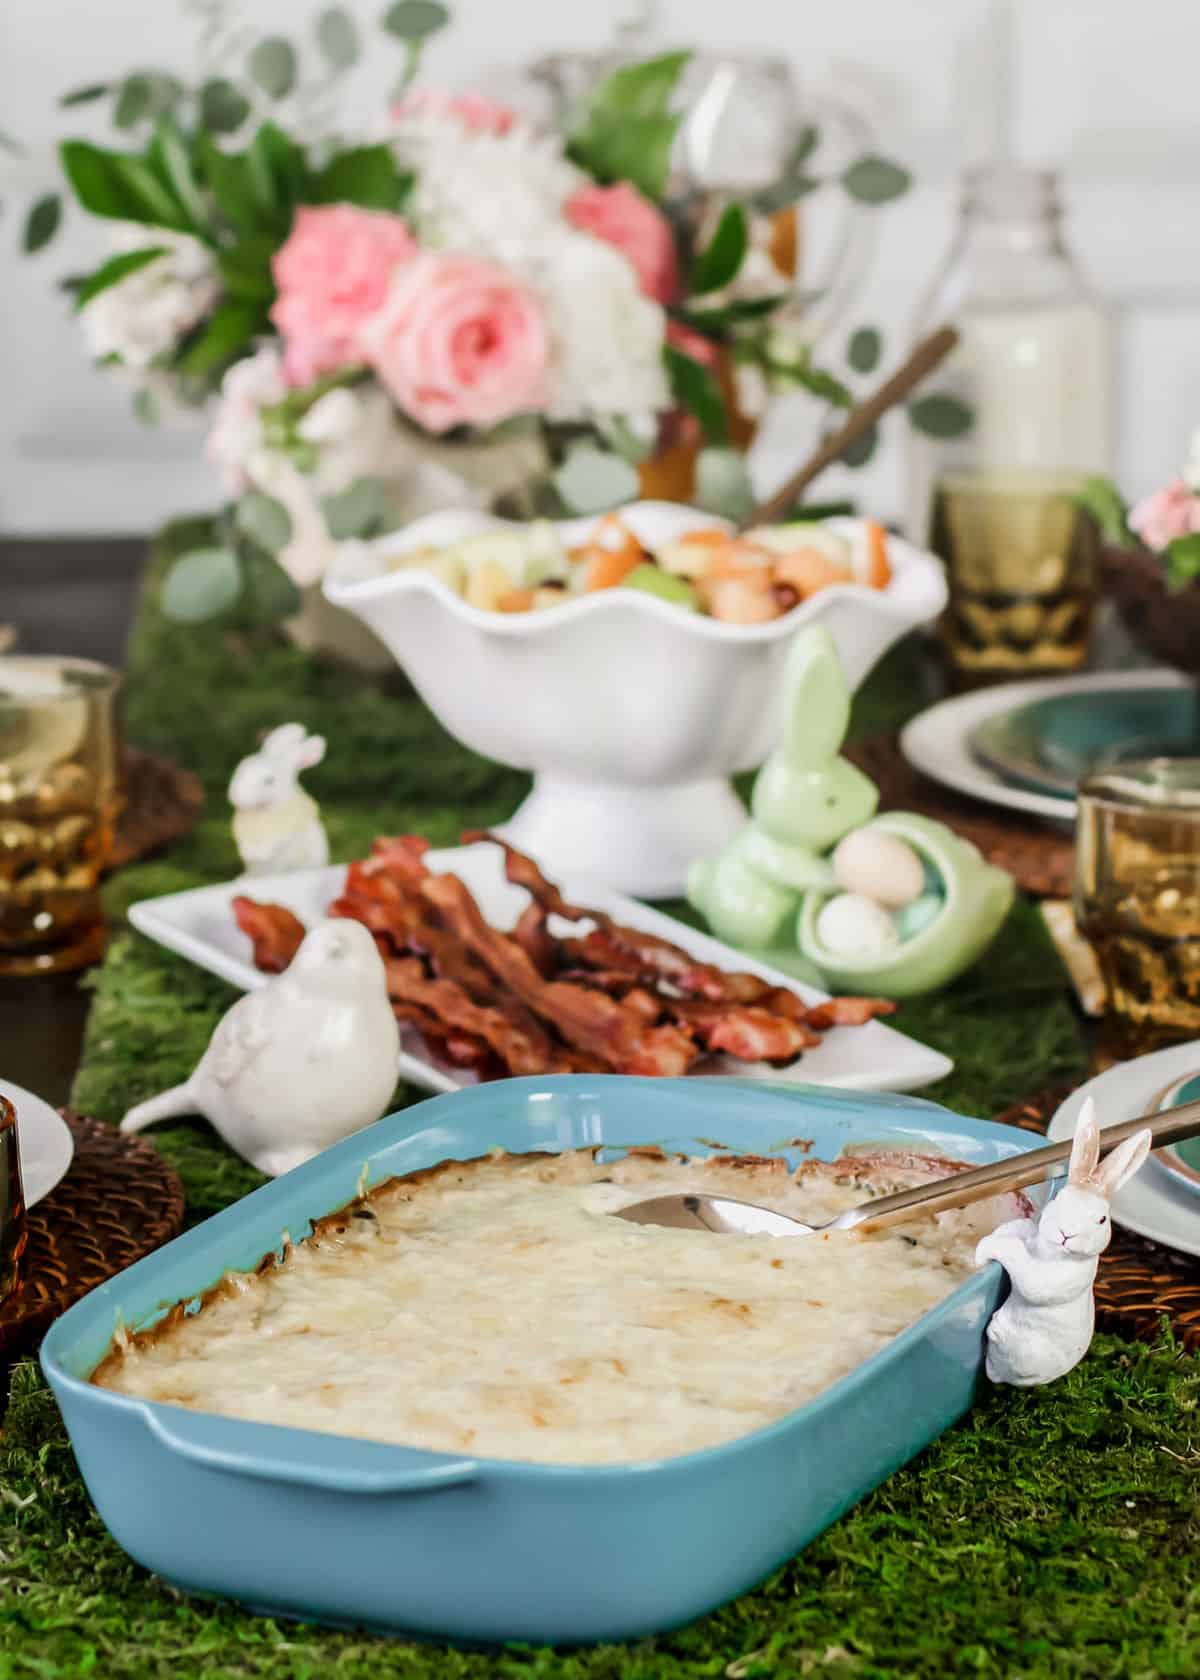 Easter table set with brunch food on green moss runner.